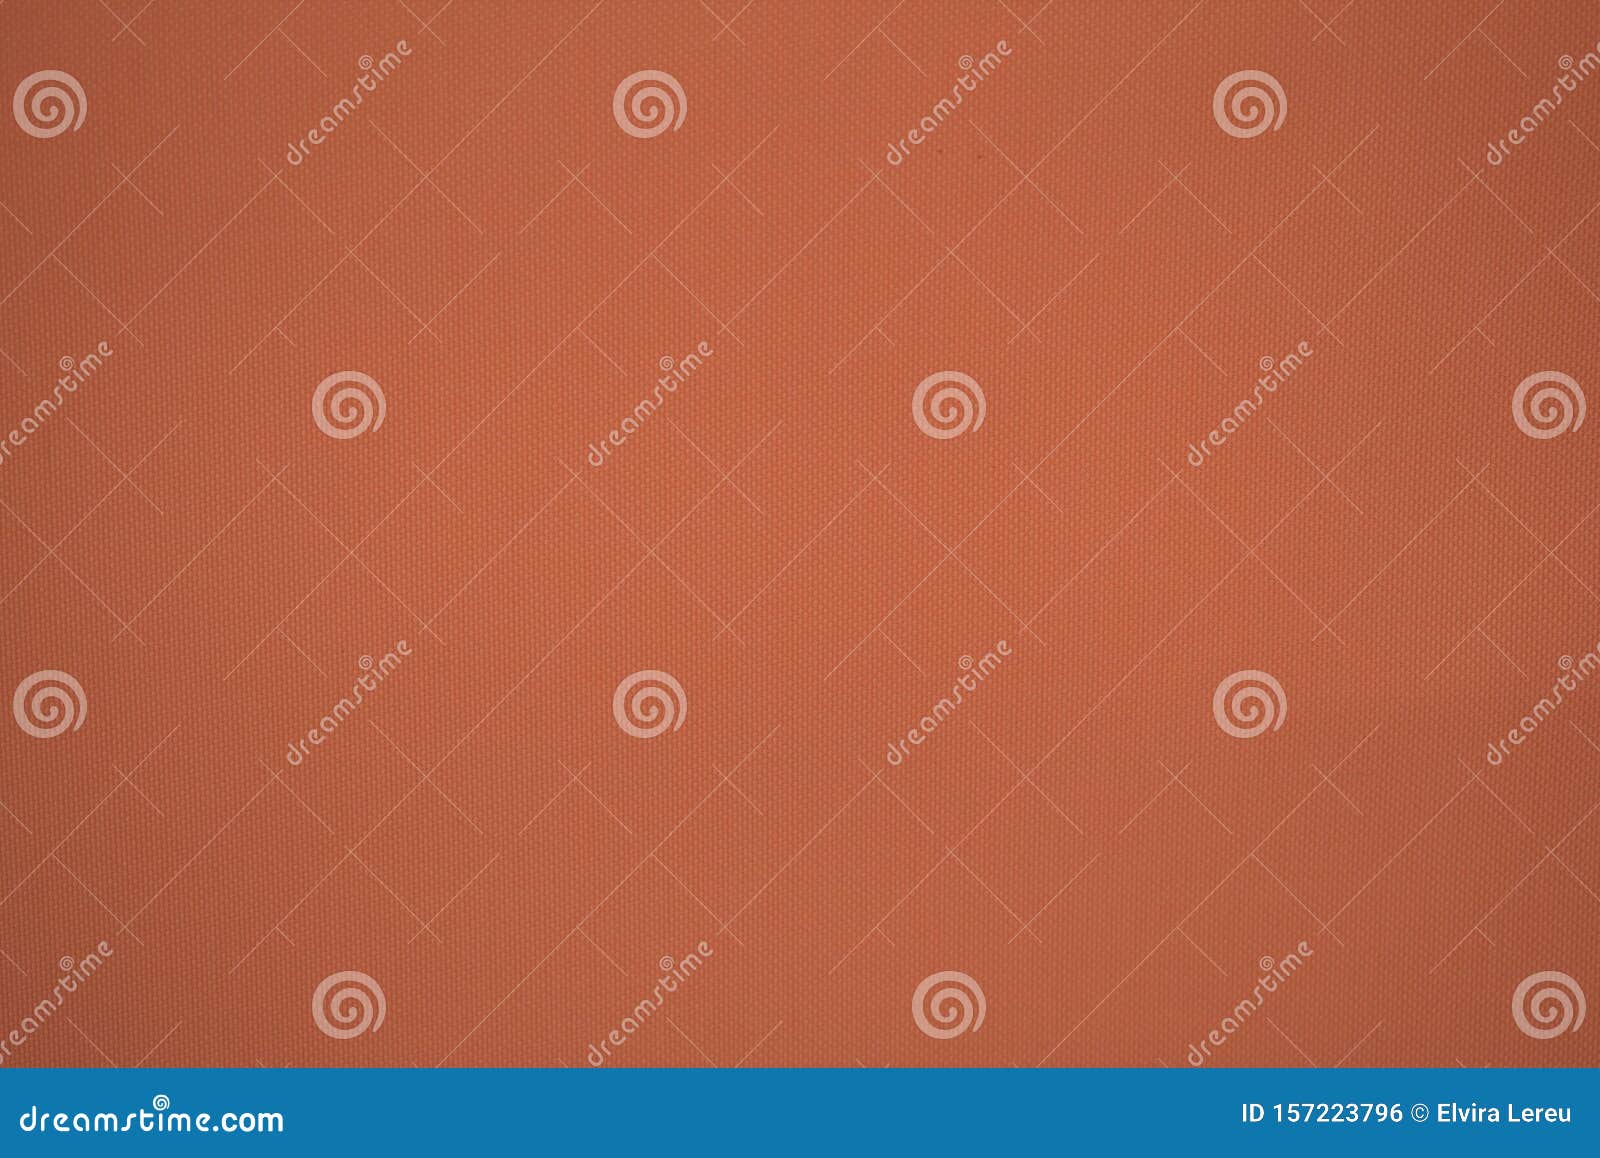 peach colored fabric texture for warm elegant background